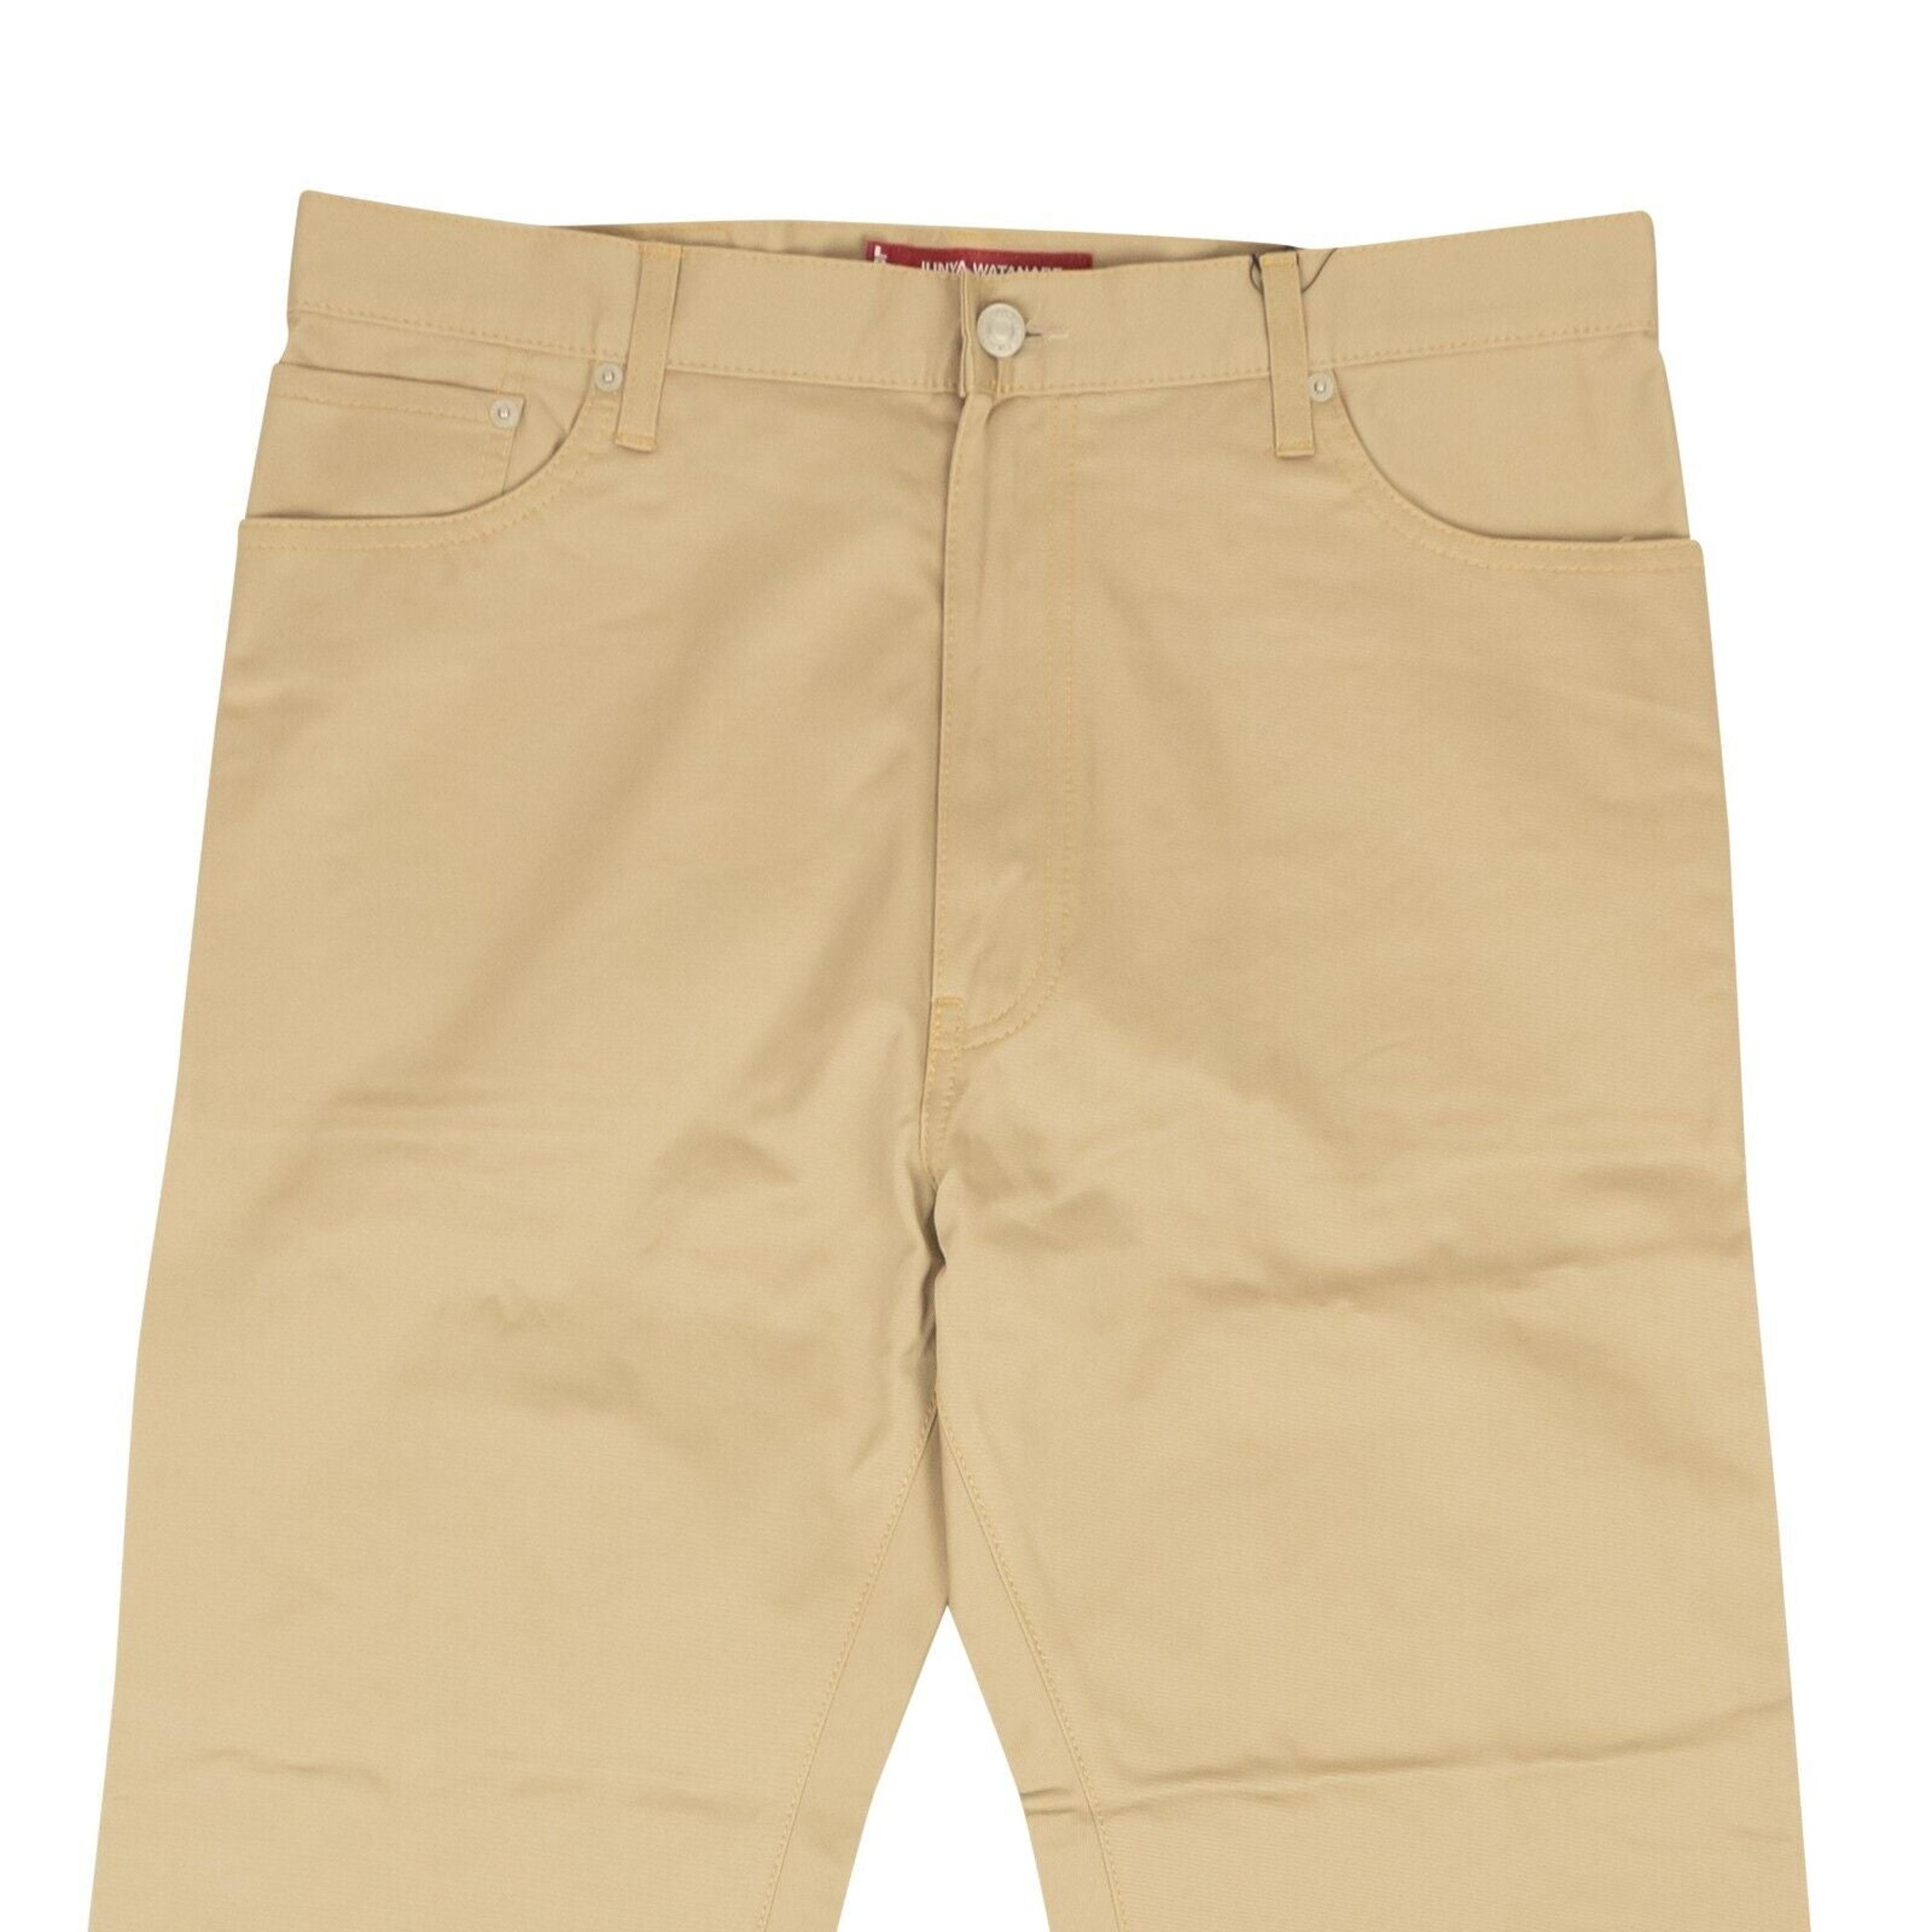 Alternate View 1 of x Levis Beige Cotton Chino Pants